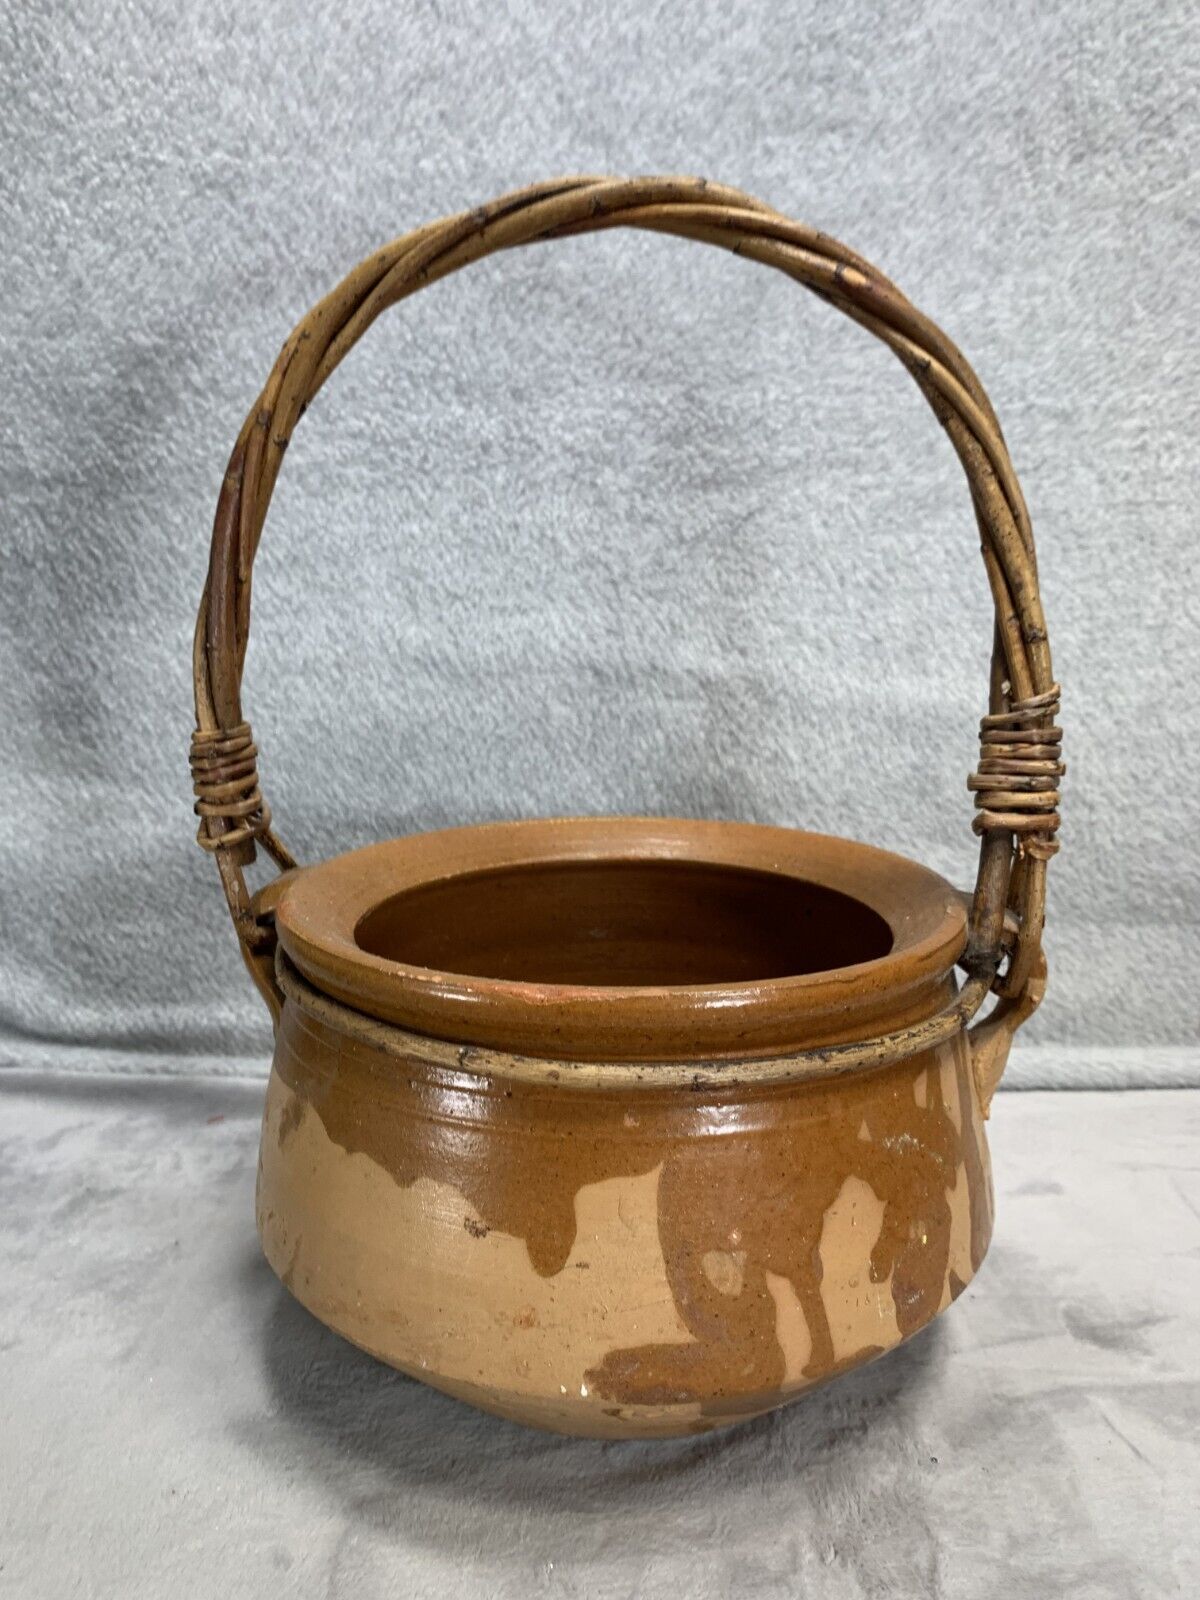 Clay Art Pottery Bowl with Wood Handle, Hand Painted